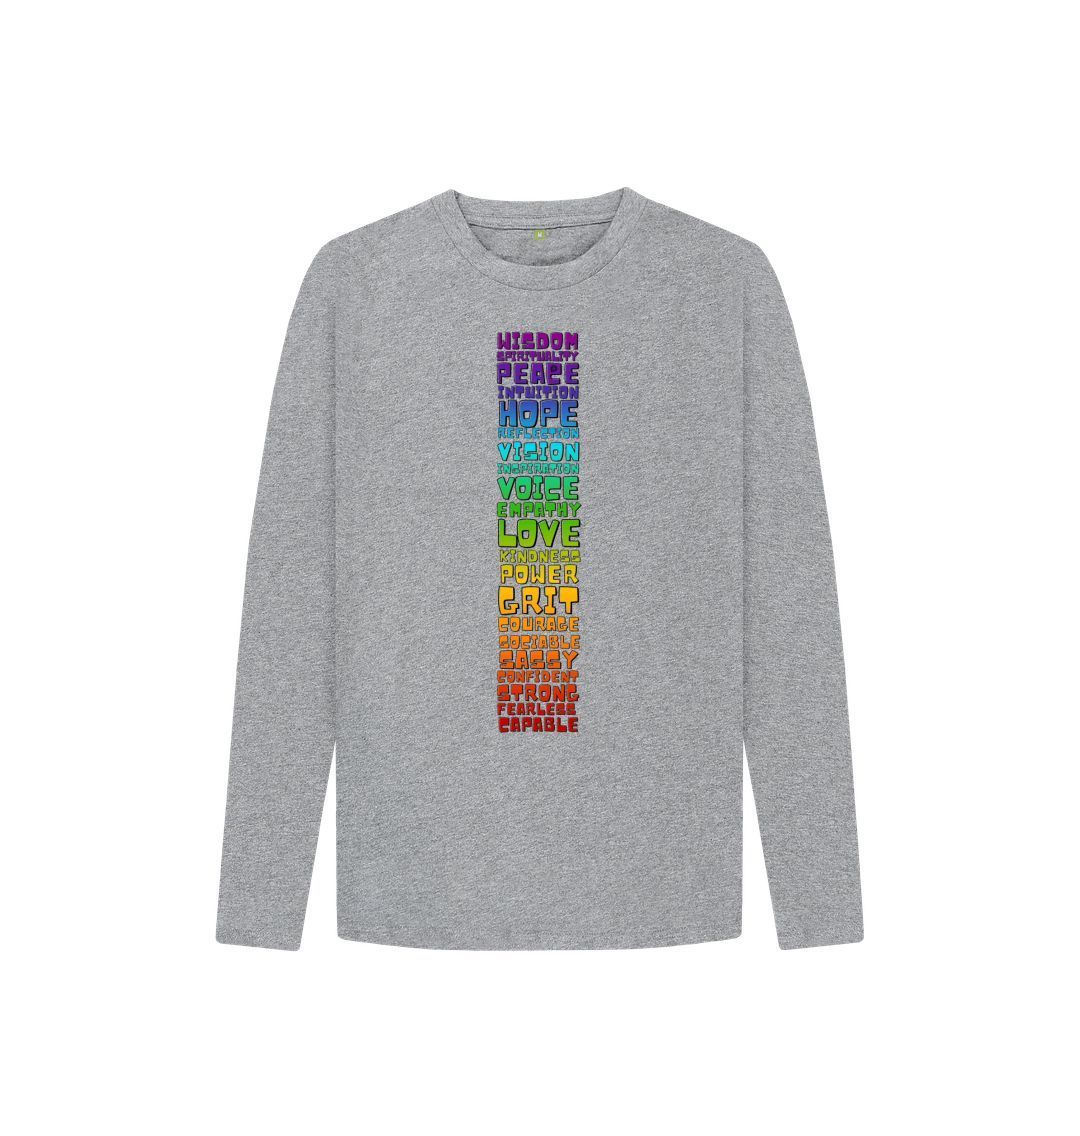 Athletic Grey Youth Long Sleeve T-shirt - Chakra Words to Empower